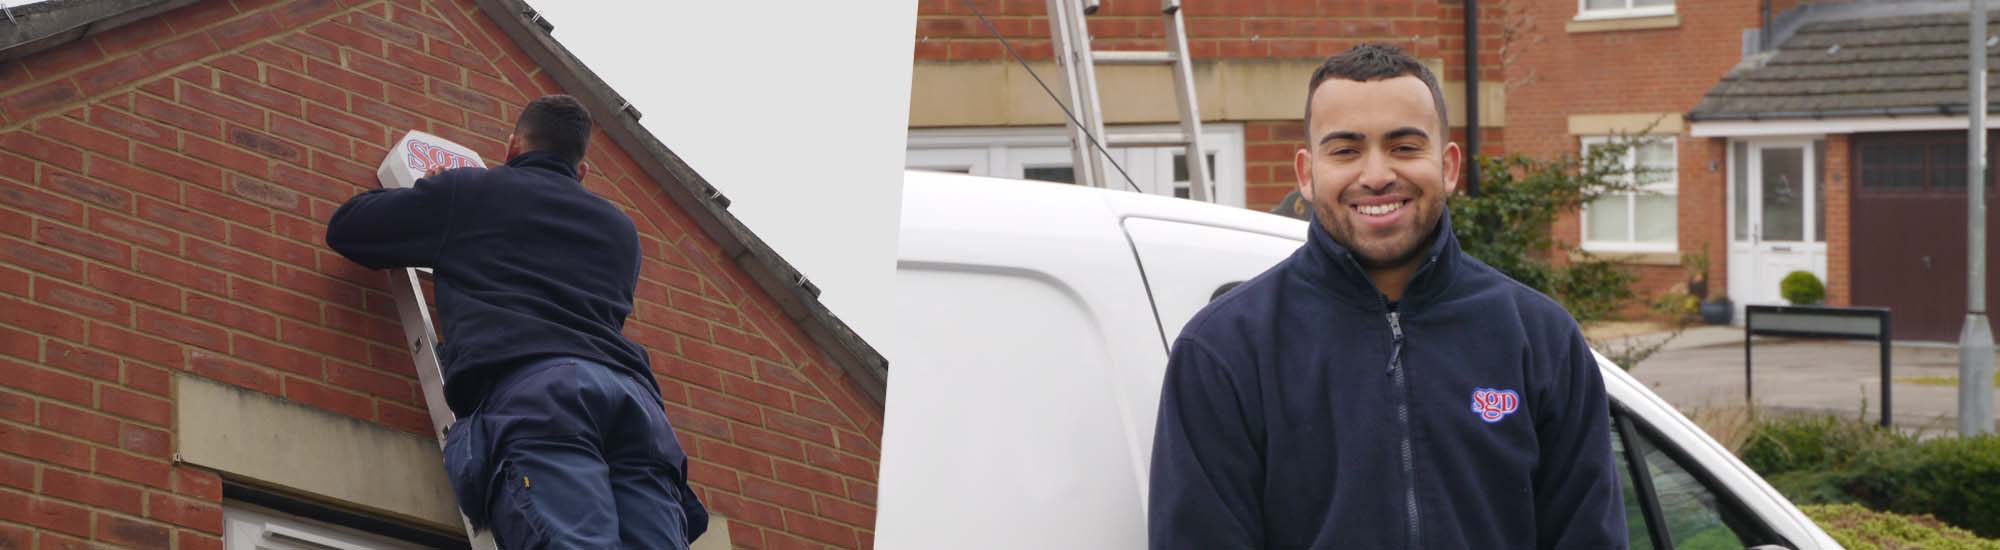 Security Installers Cardiff